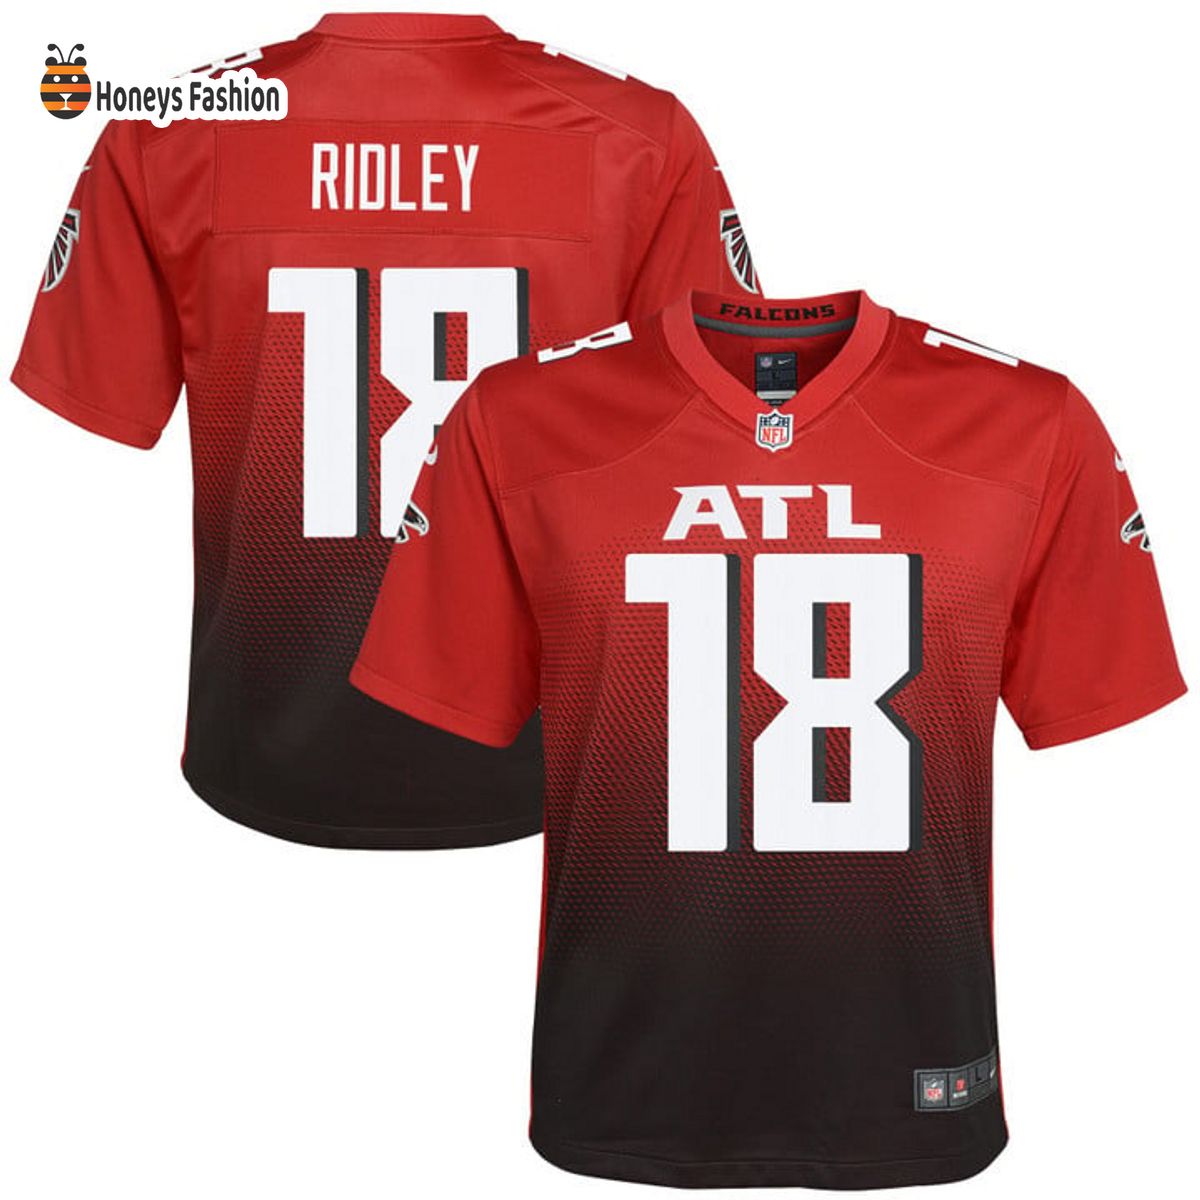 Calvin Ridley Atlanta Falcons Nike Youth 2nd Alternate Red Game Jersey